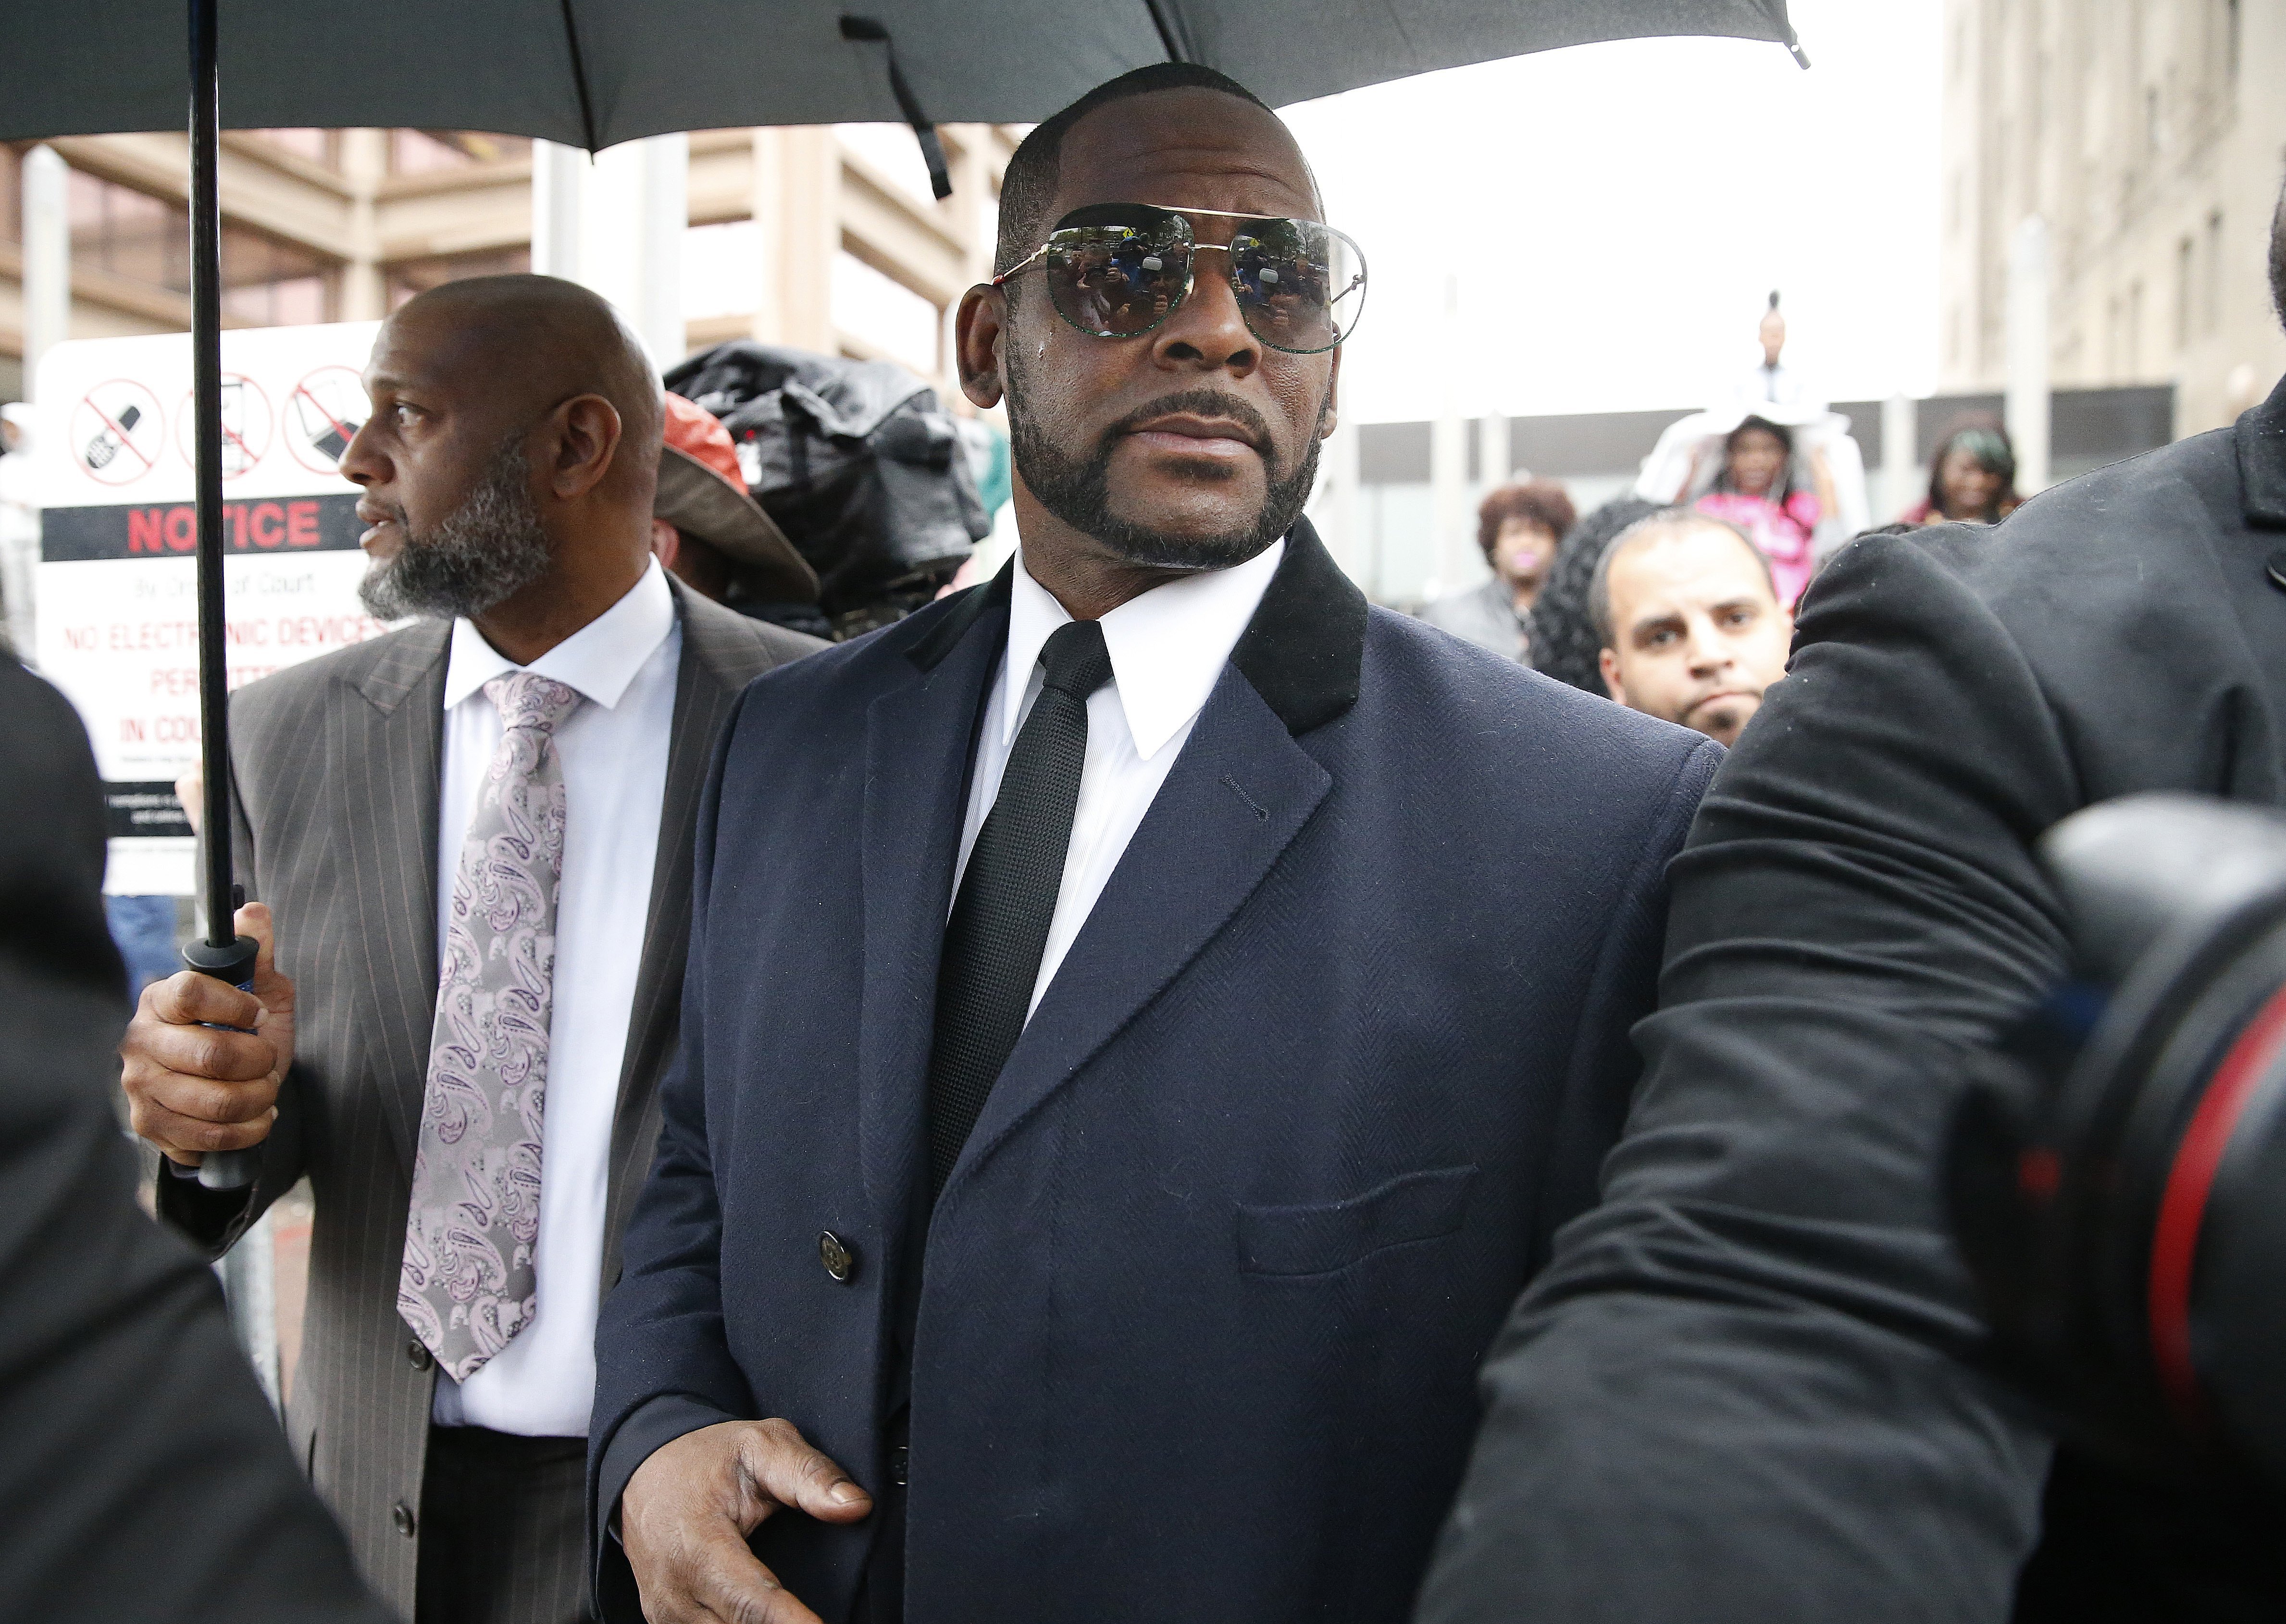 R. Kelly leaves the Leighton Courthouse on May 07, 2019 in Chicago| Photo: Getty Images